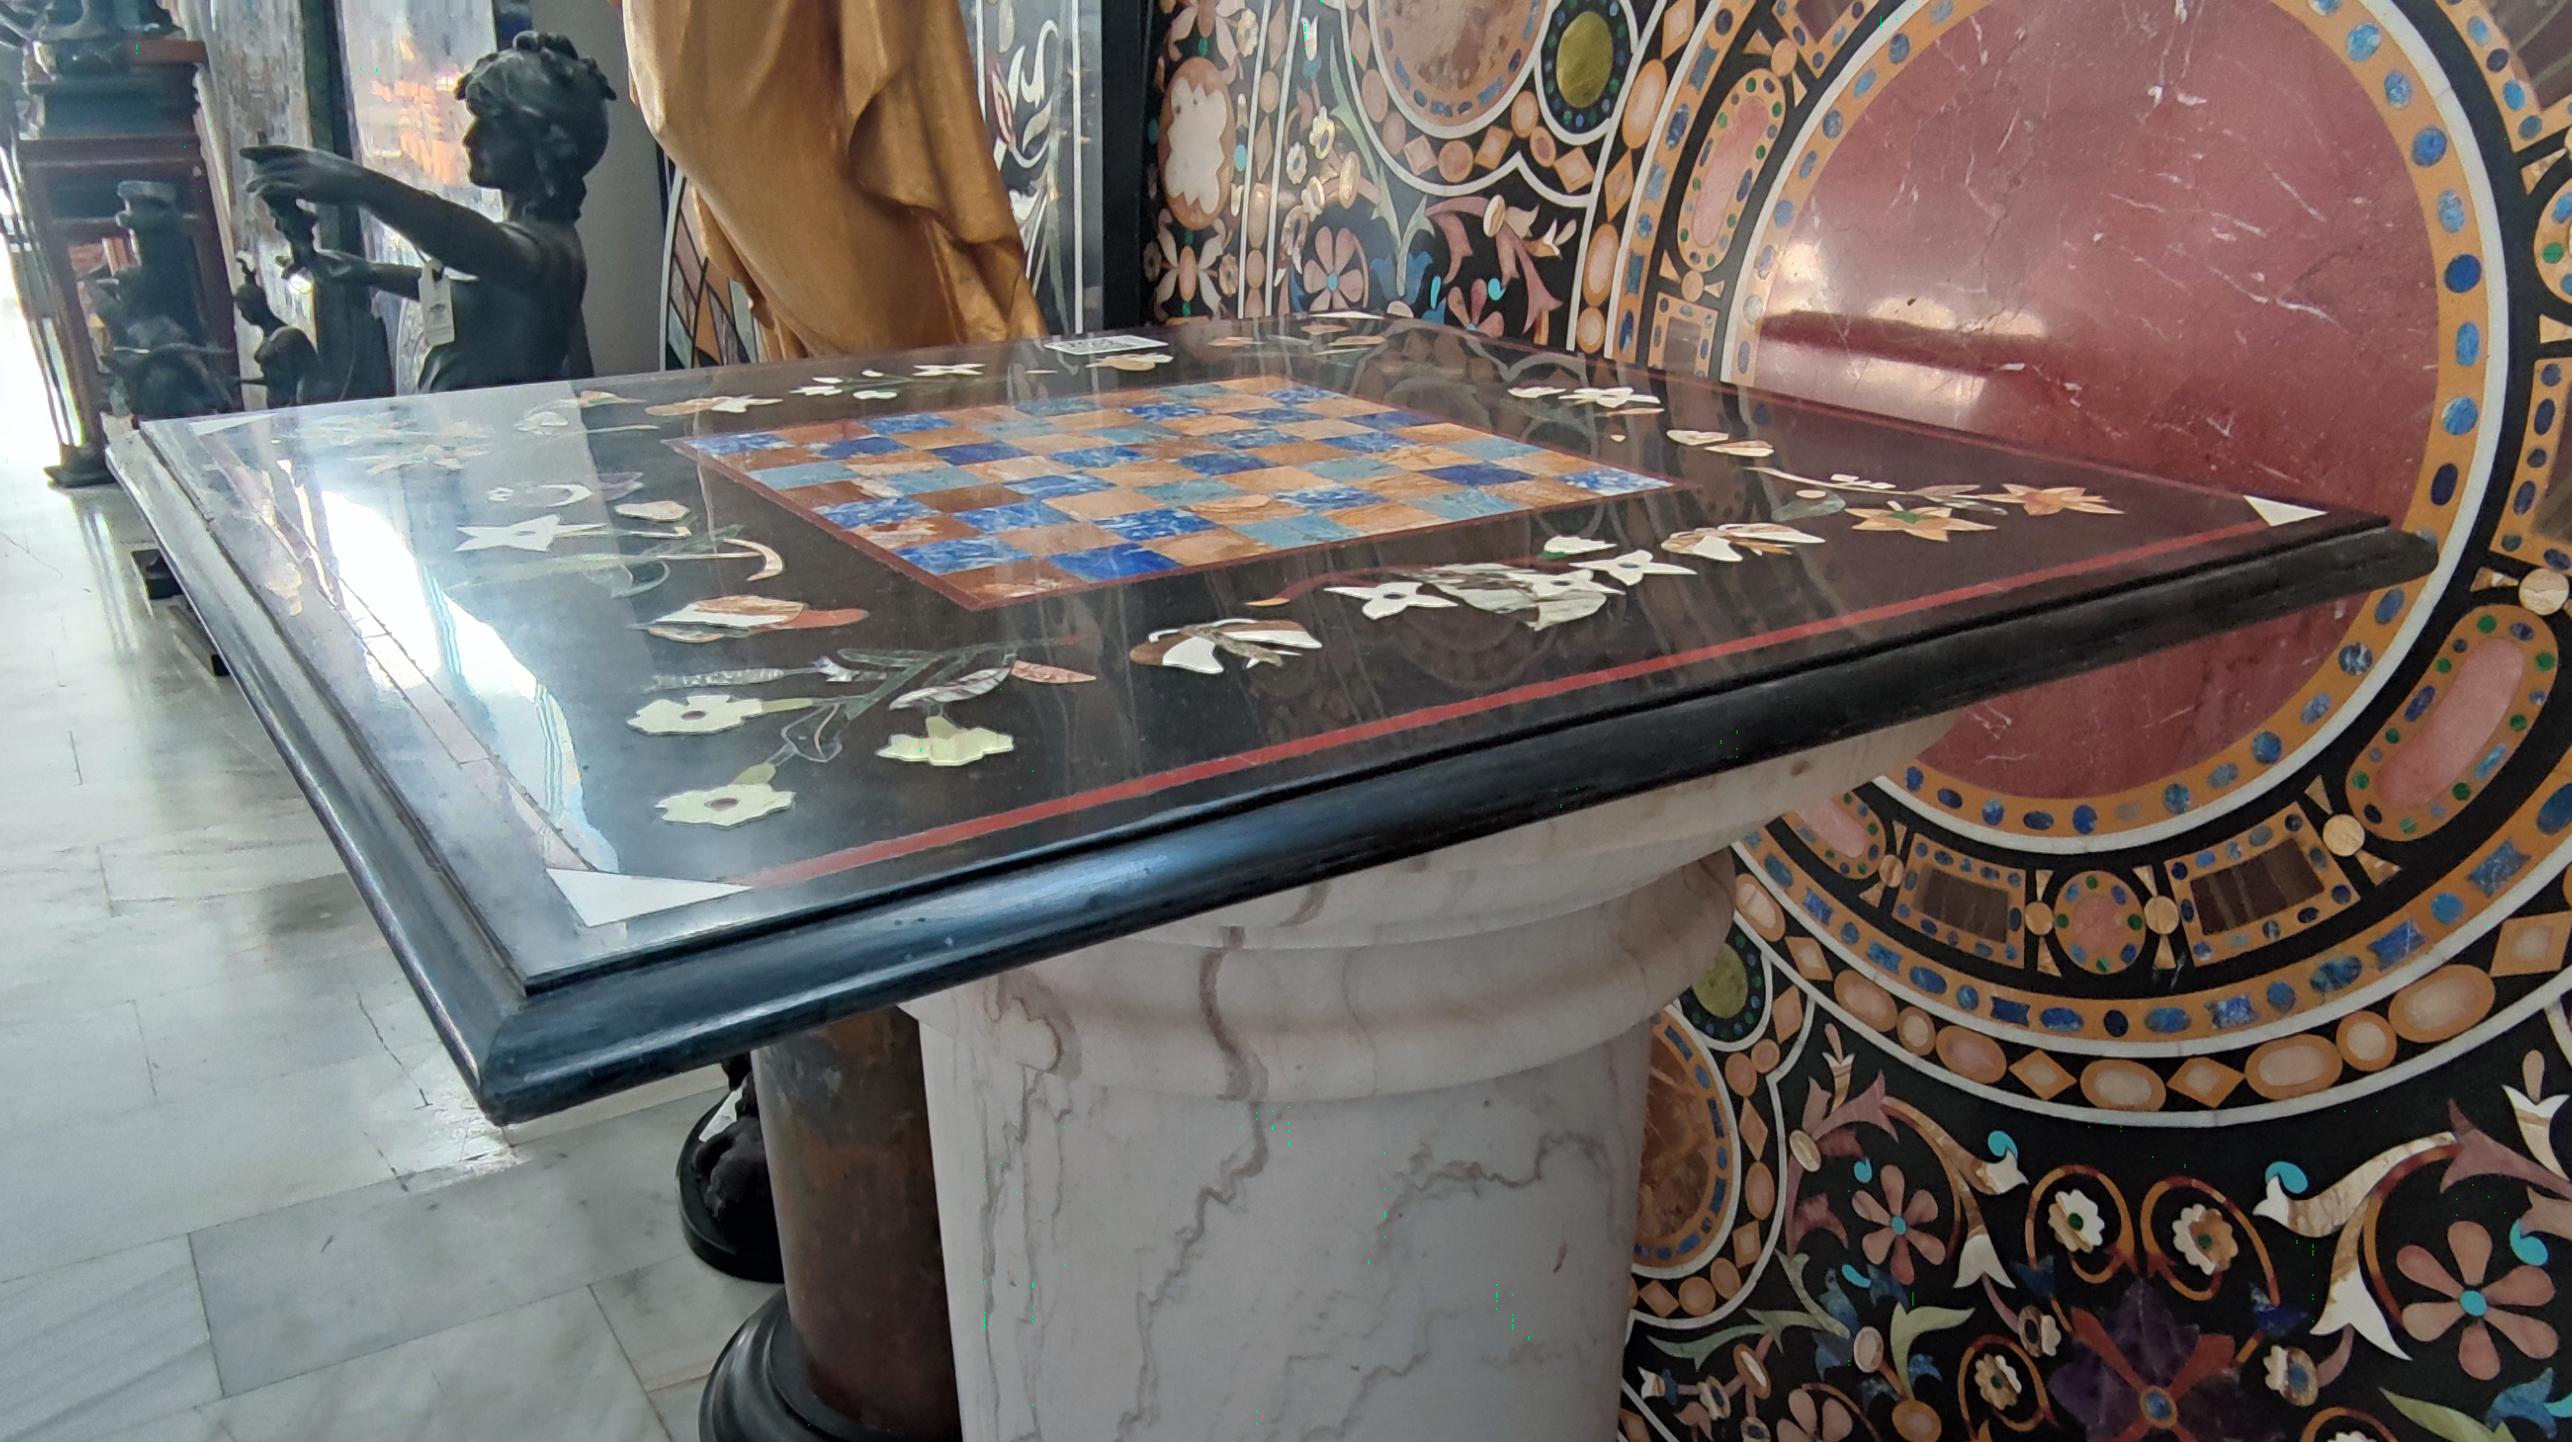 European 1990s Spanish Handmade Pietra Dura Inlay Mosaic Square Table Top W/ Chess Board For Sale